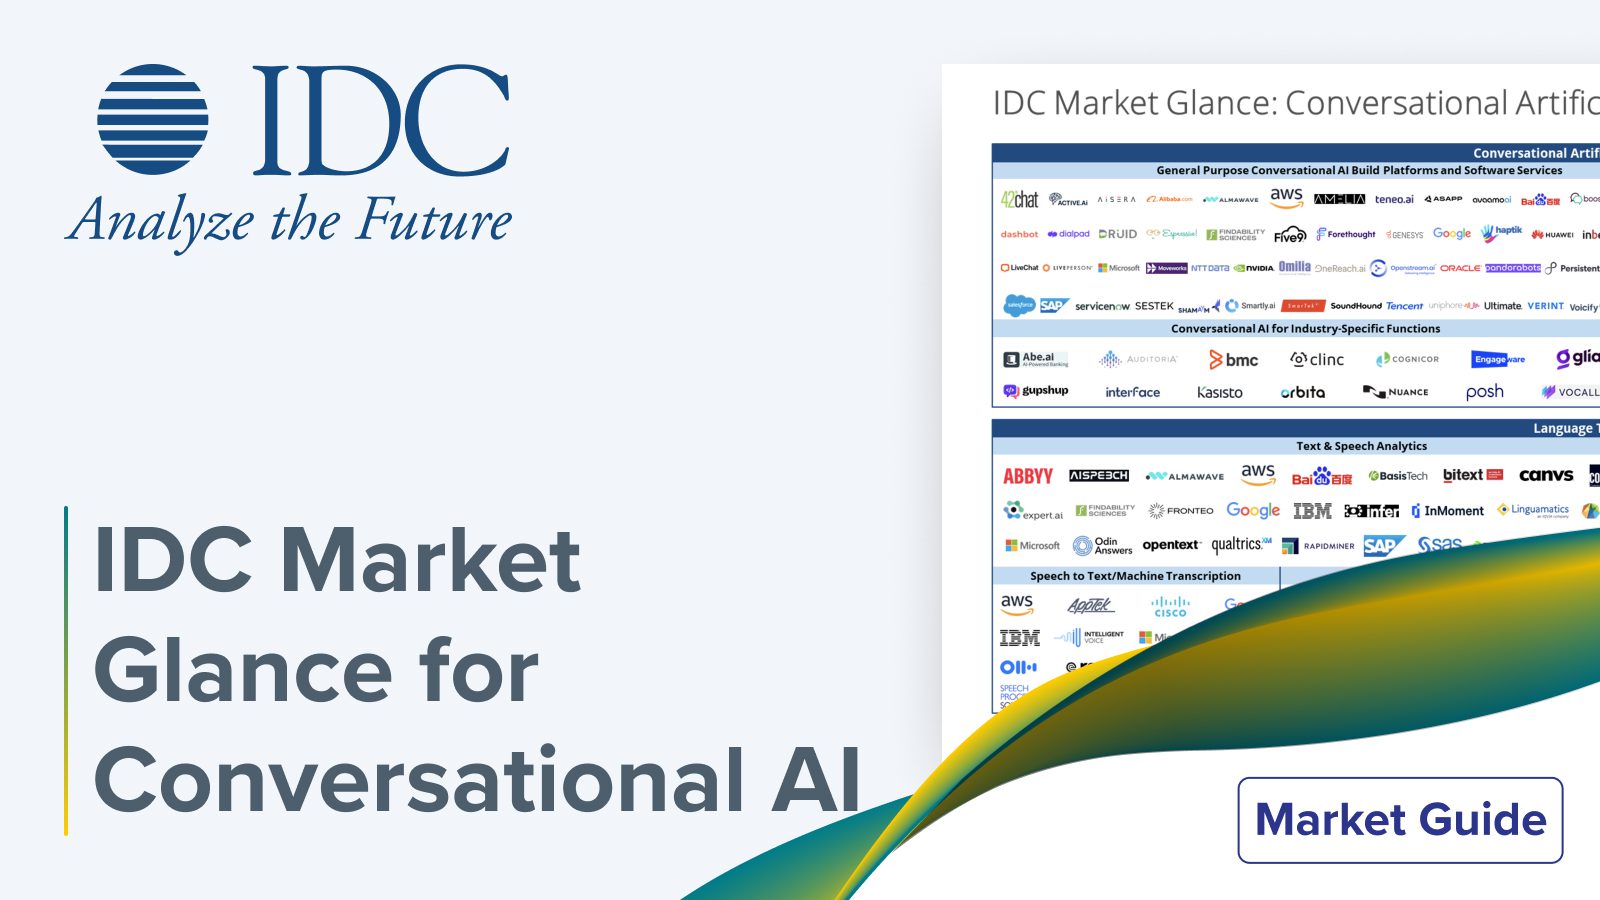 IDC Market Glance for Conversational AI cover image